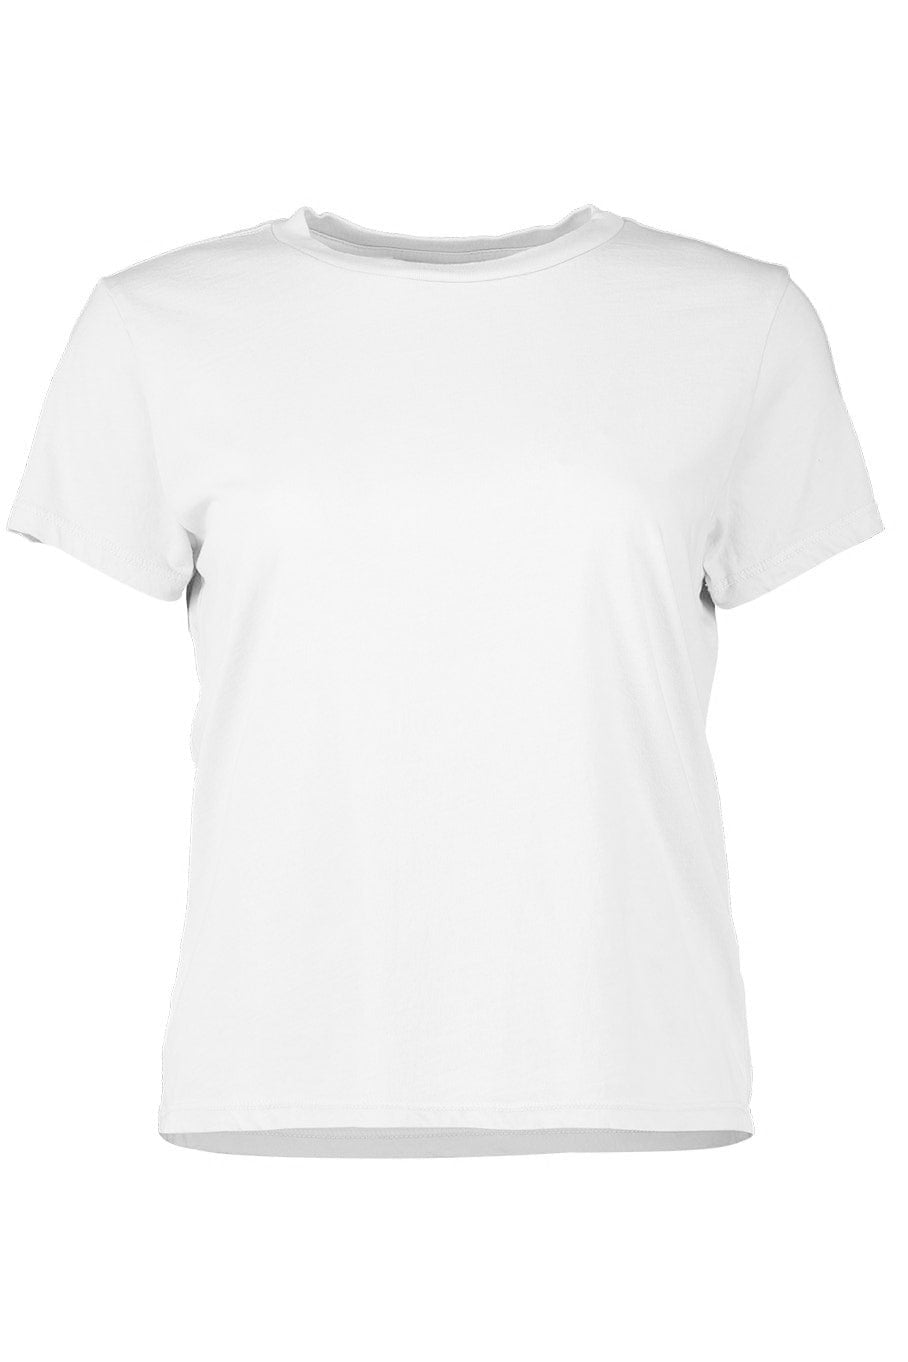 MOTHER-The Lil Goodie Goodie Tee - Bright White-